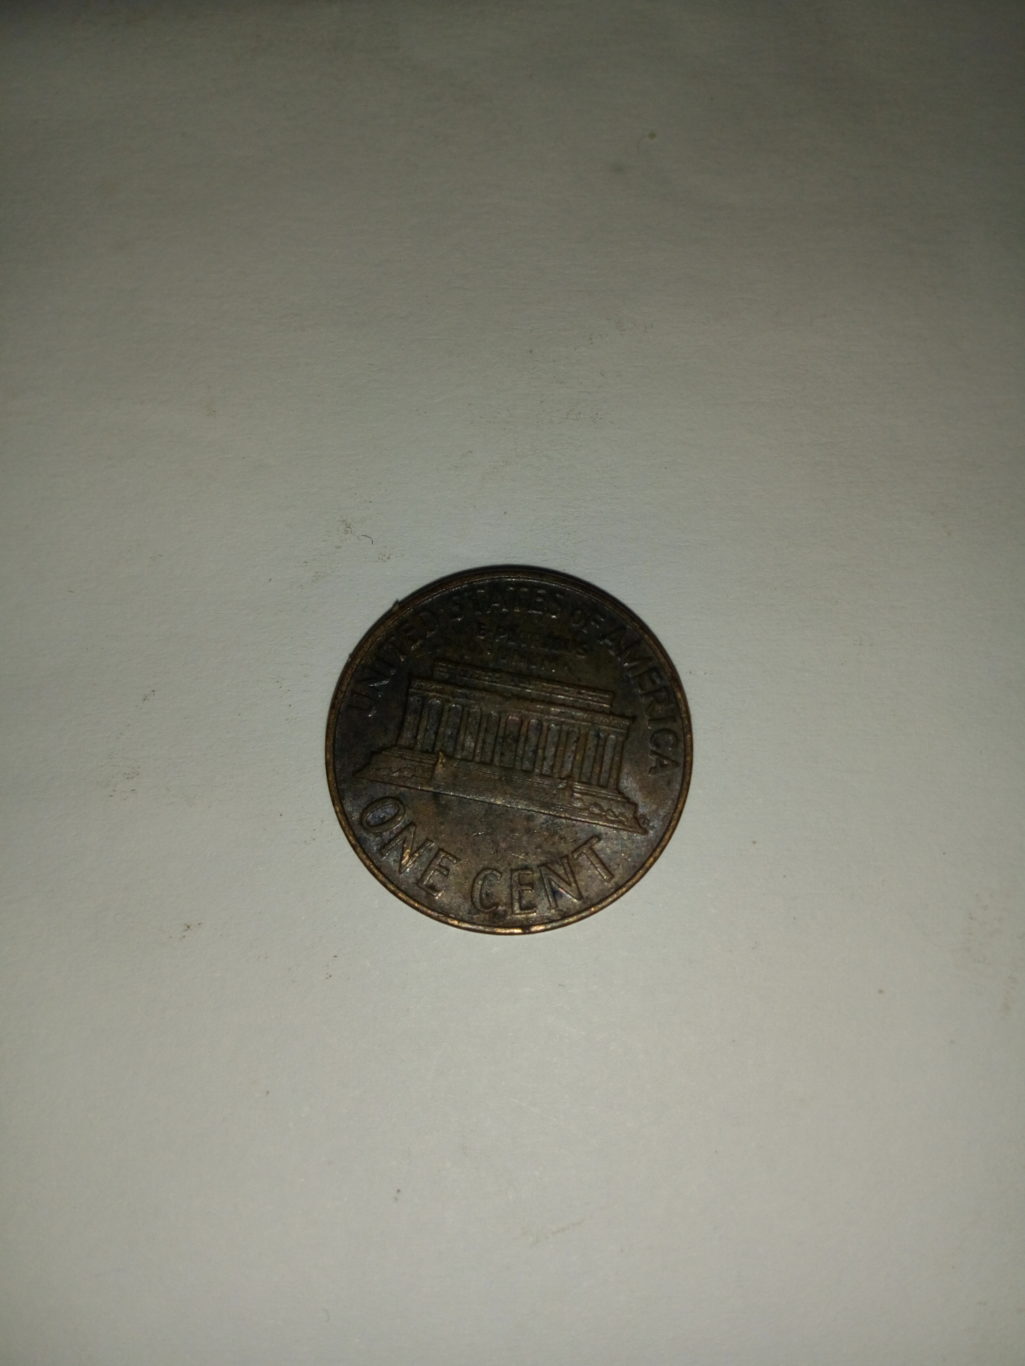 1965_ united states of America 1 cent